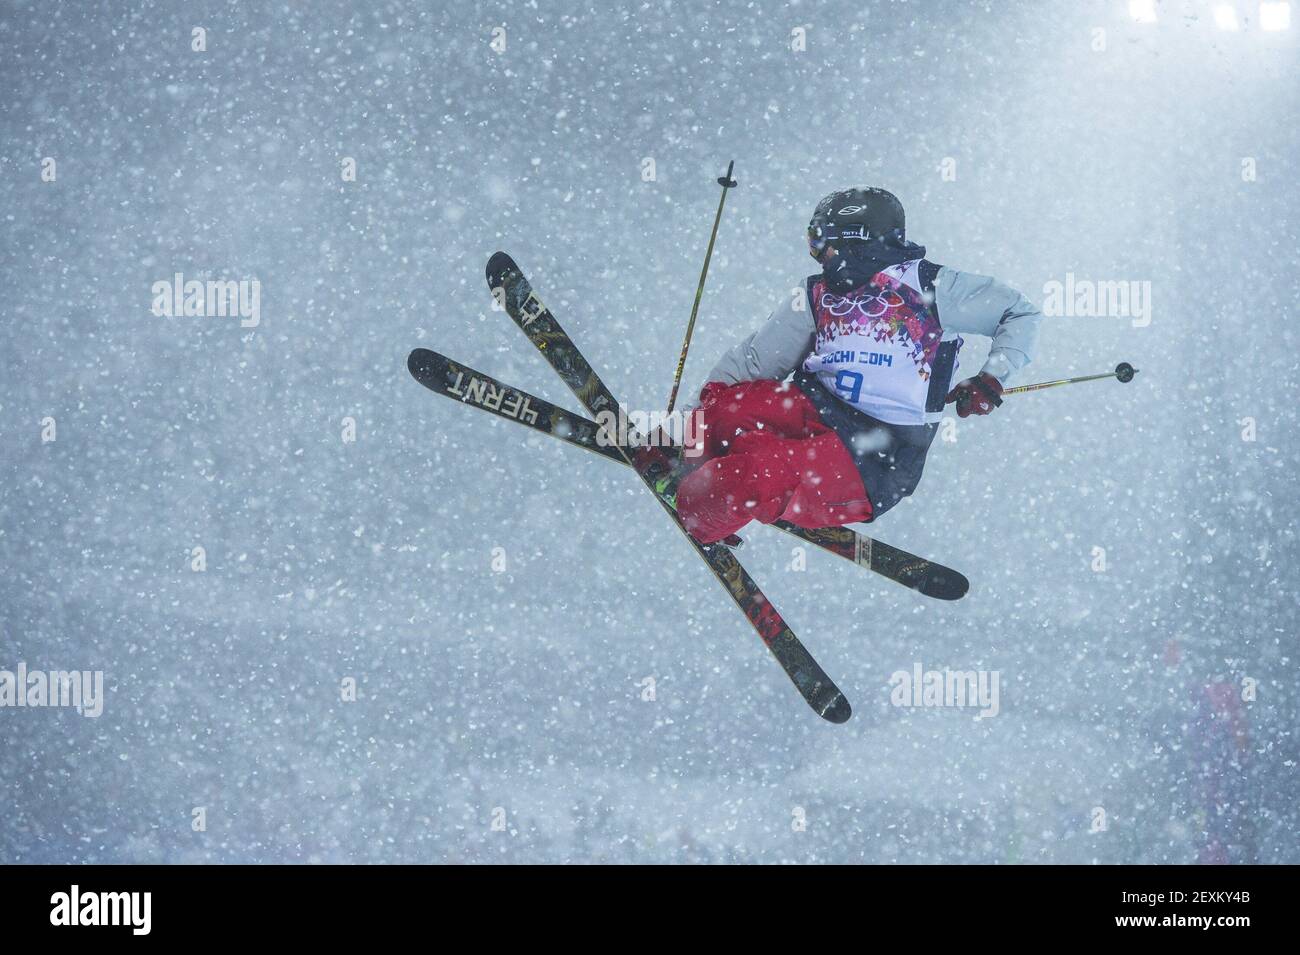 USA's David Wise competes in the men's ski halfpipe at Rosa Khutor Extreme Park during the Winter Olympics in Sochi, Russia, on Tuesday, Feb. 18, 2014. (Photo by Mark Reis/Colorado Springs Gazette/MCT/Sipa USA) Stock Photo